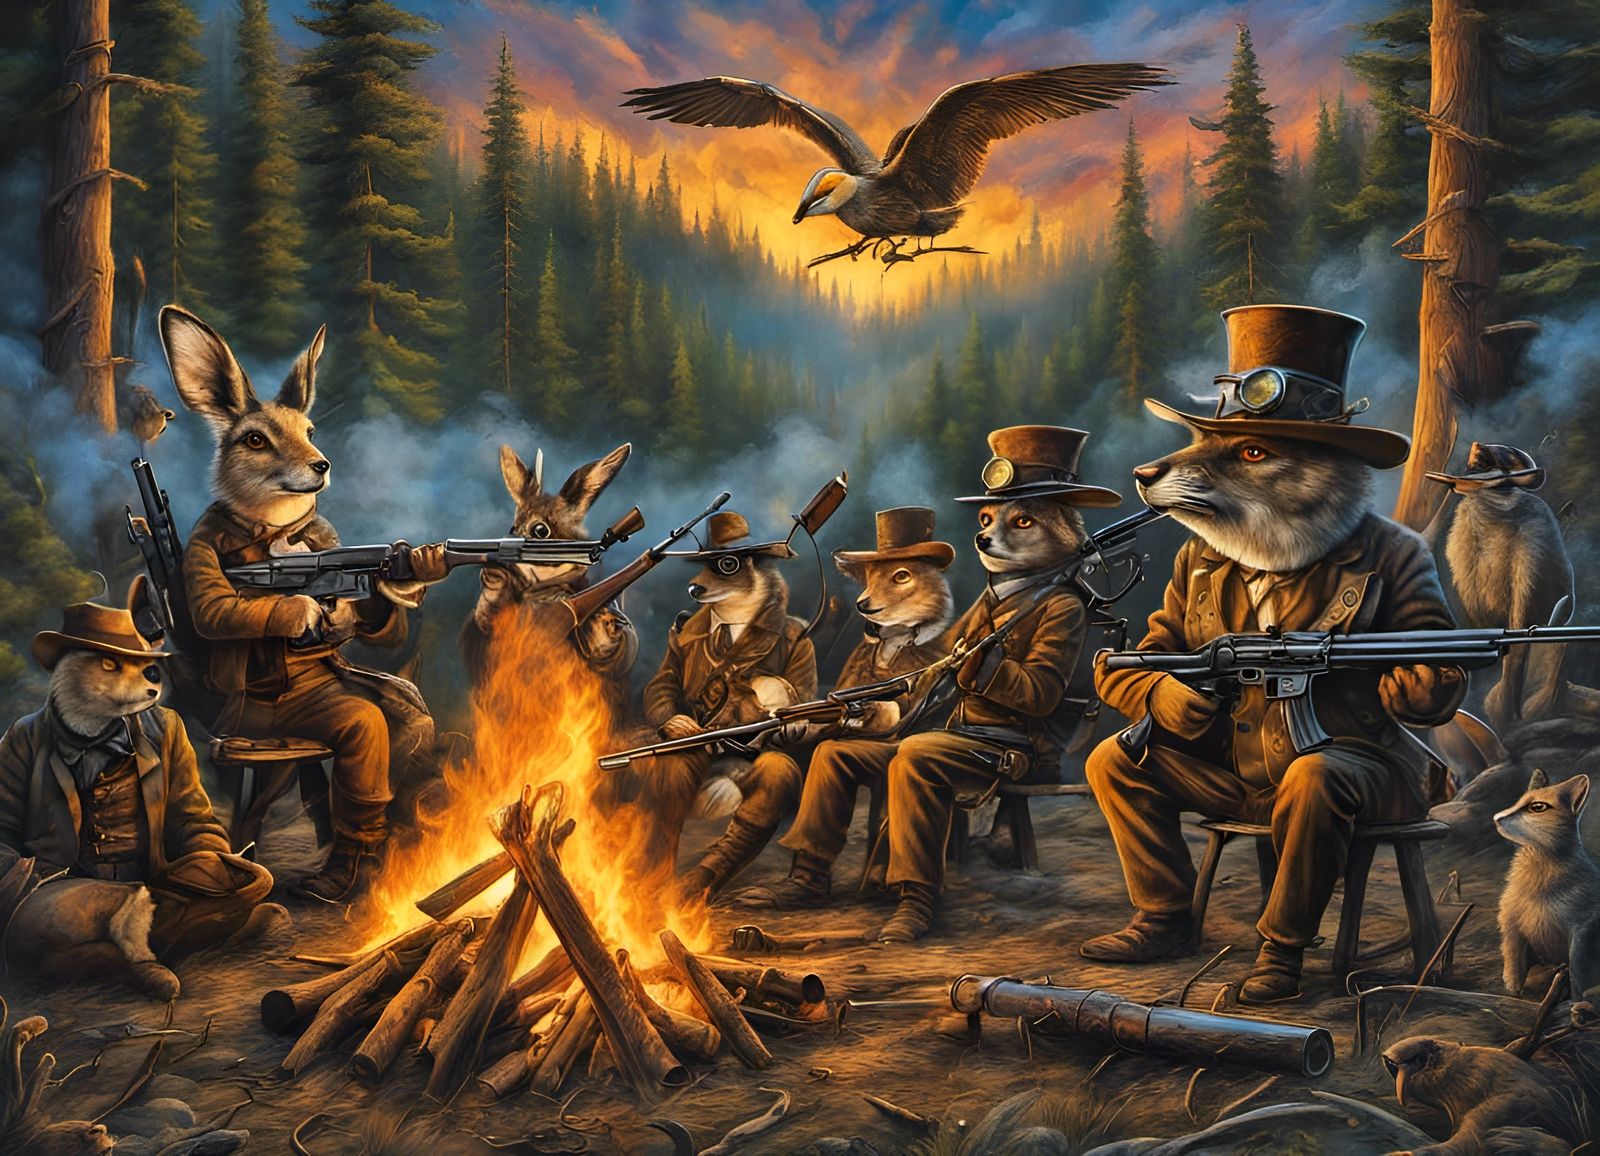 Many detailed steampunk animals gathered to burn rifles